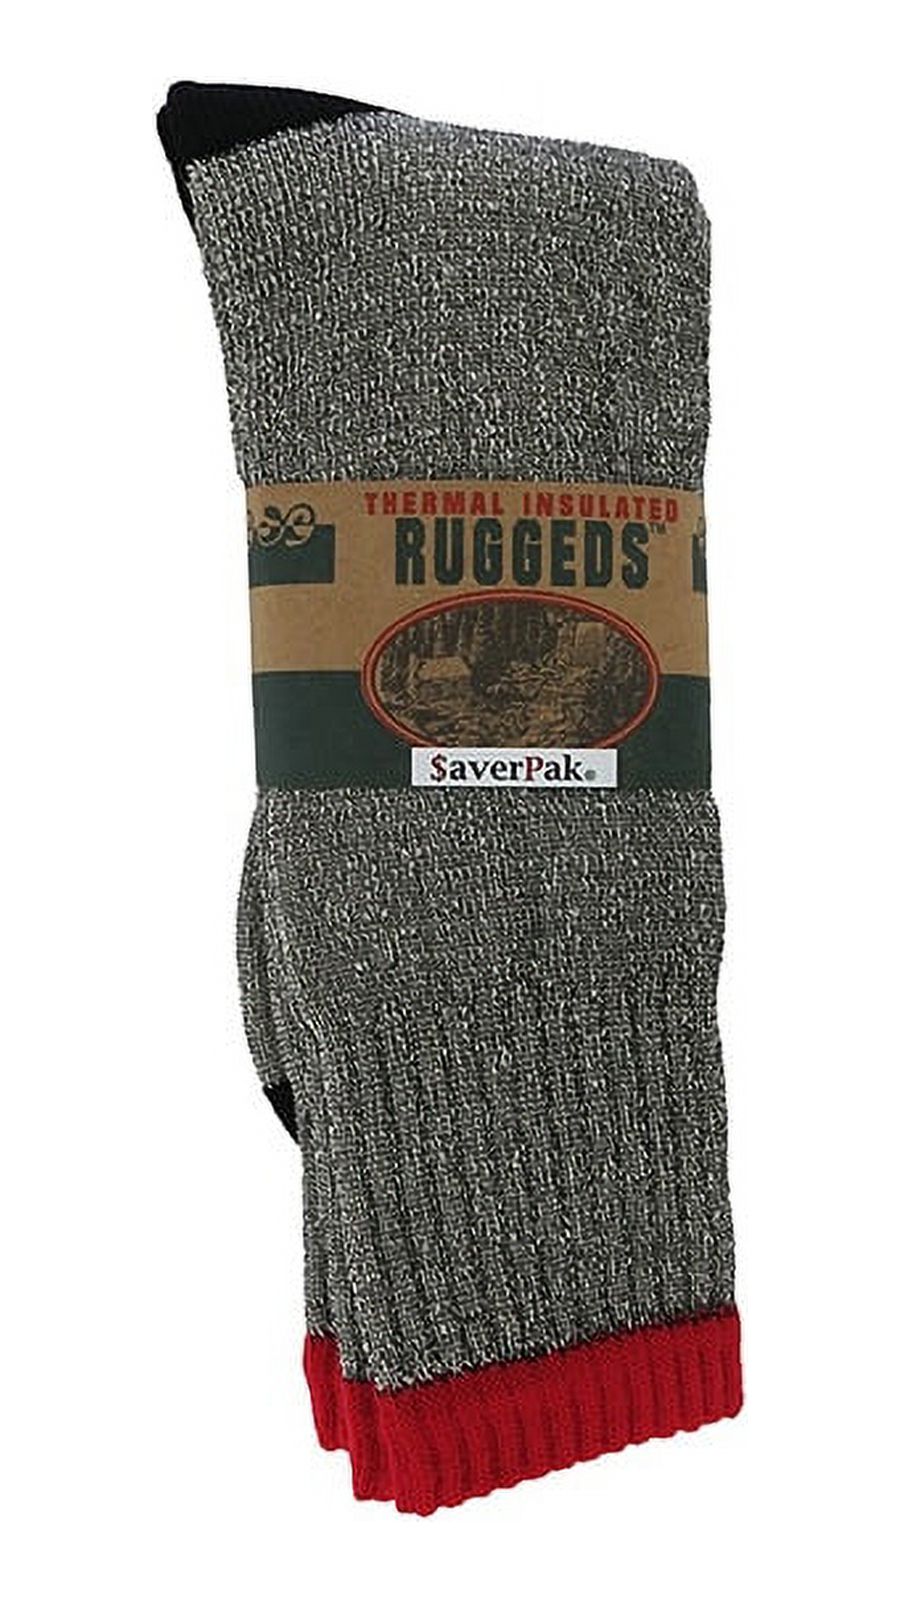 $averPak 2 Pack - Includes 2 Pair Ruggeds Cotton Blend Thermal Socks (2 Pair Per Band Size 9-11) - image 1 of 3